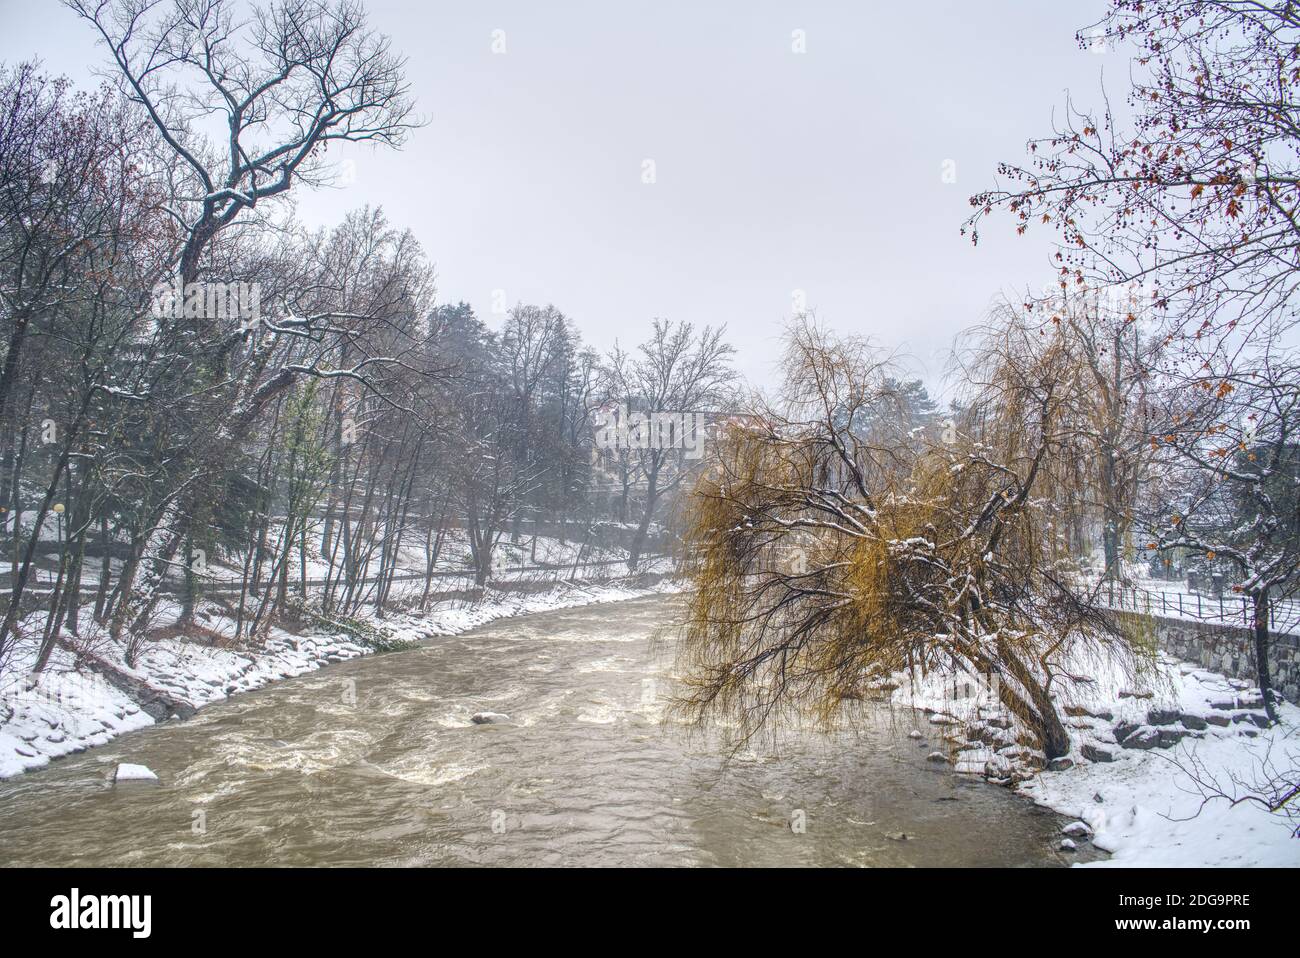 Passer river's dirty water after a heavy snowfall and its promenade on the sides in Merano, Italy covered by wet snow. Stock Photo